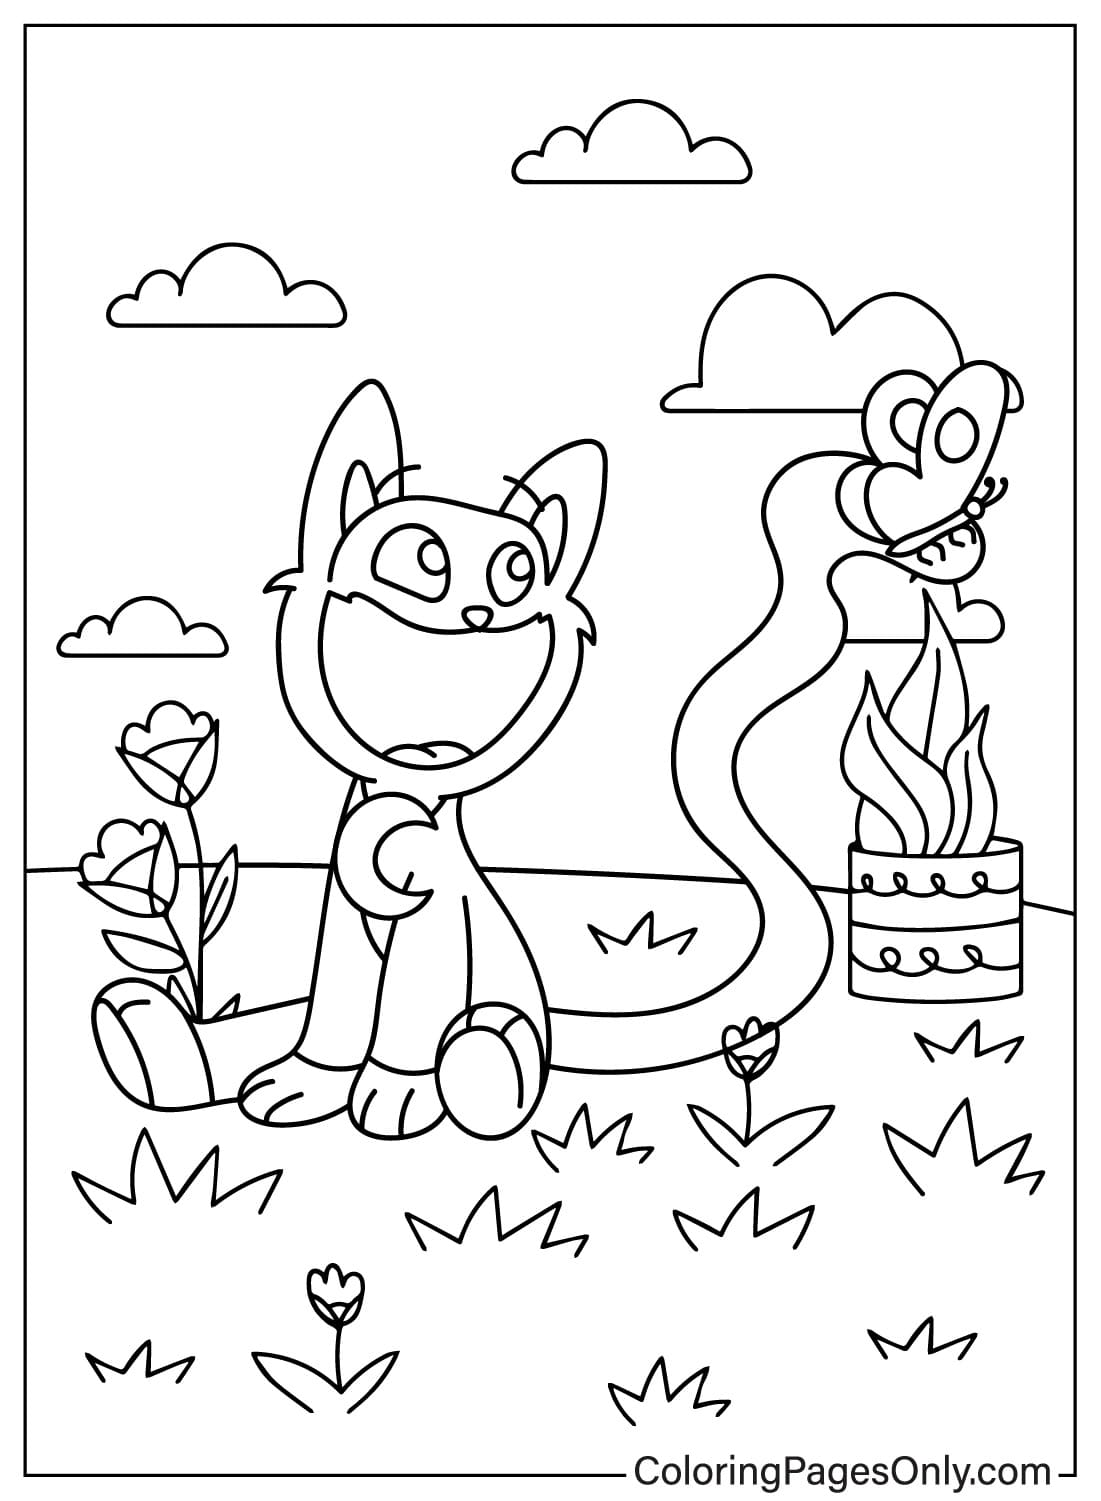 CatNap Coloring Pages to for Kids from CatNap